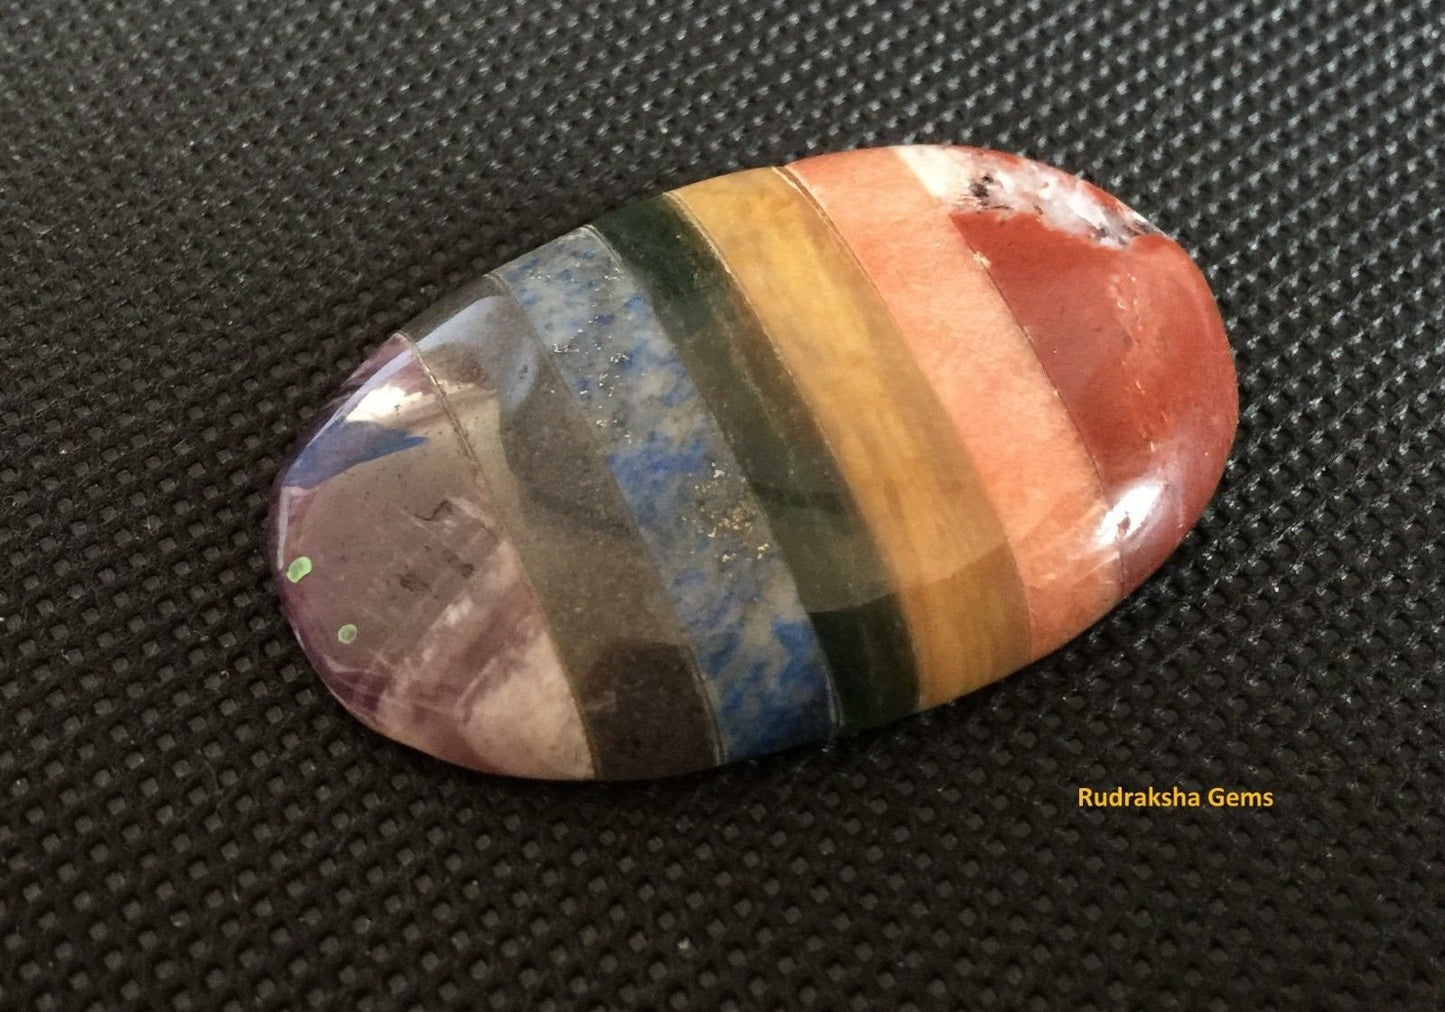 Chakra Natural Crystal Palm Stone / Worry Stone / Cabochon including 7 Bonded Crystal Types Reiki Energy Charged 7 Chakra Crystal Palm Stone